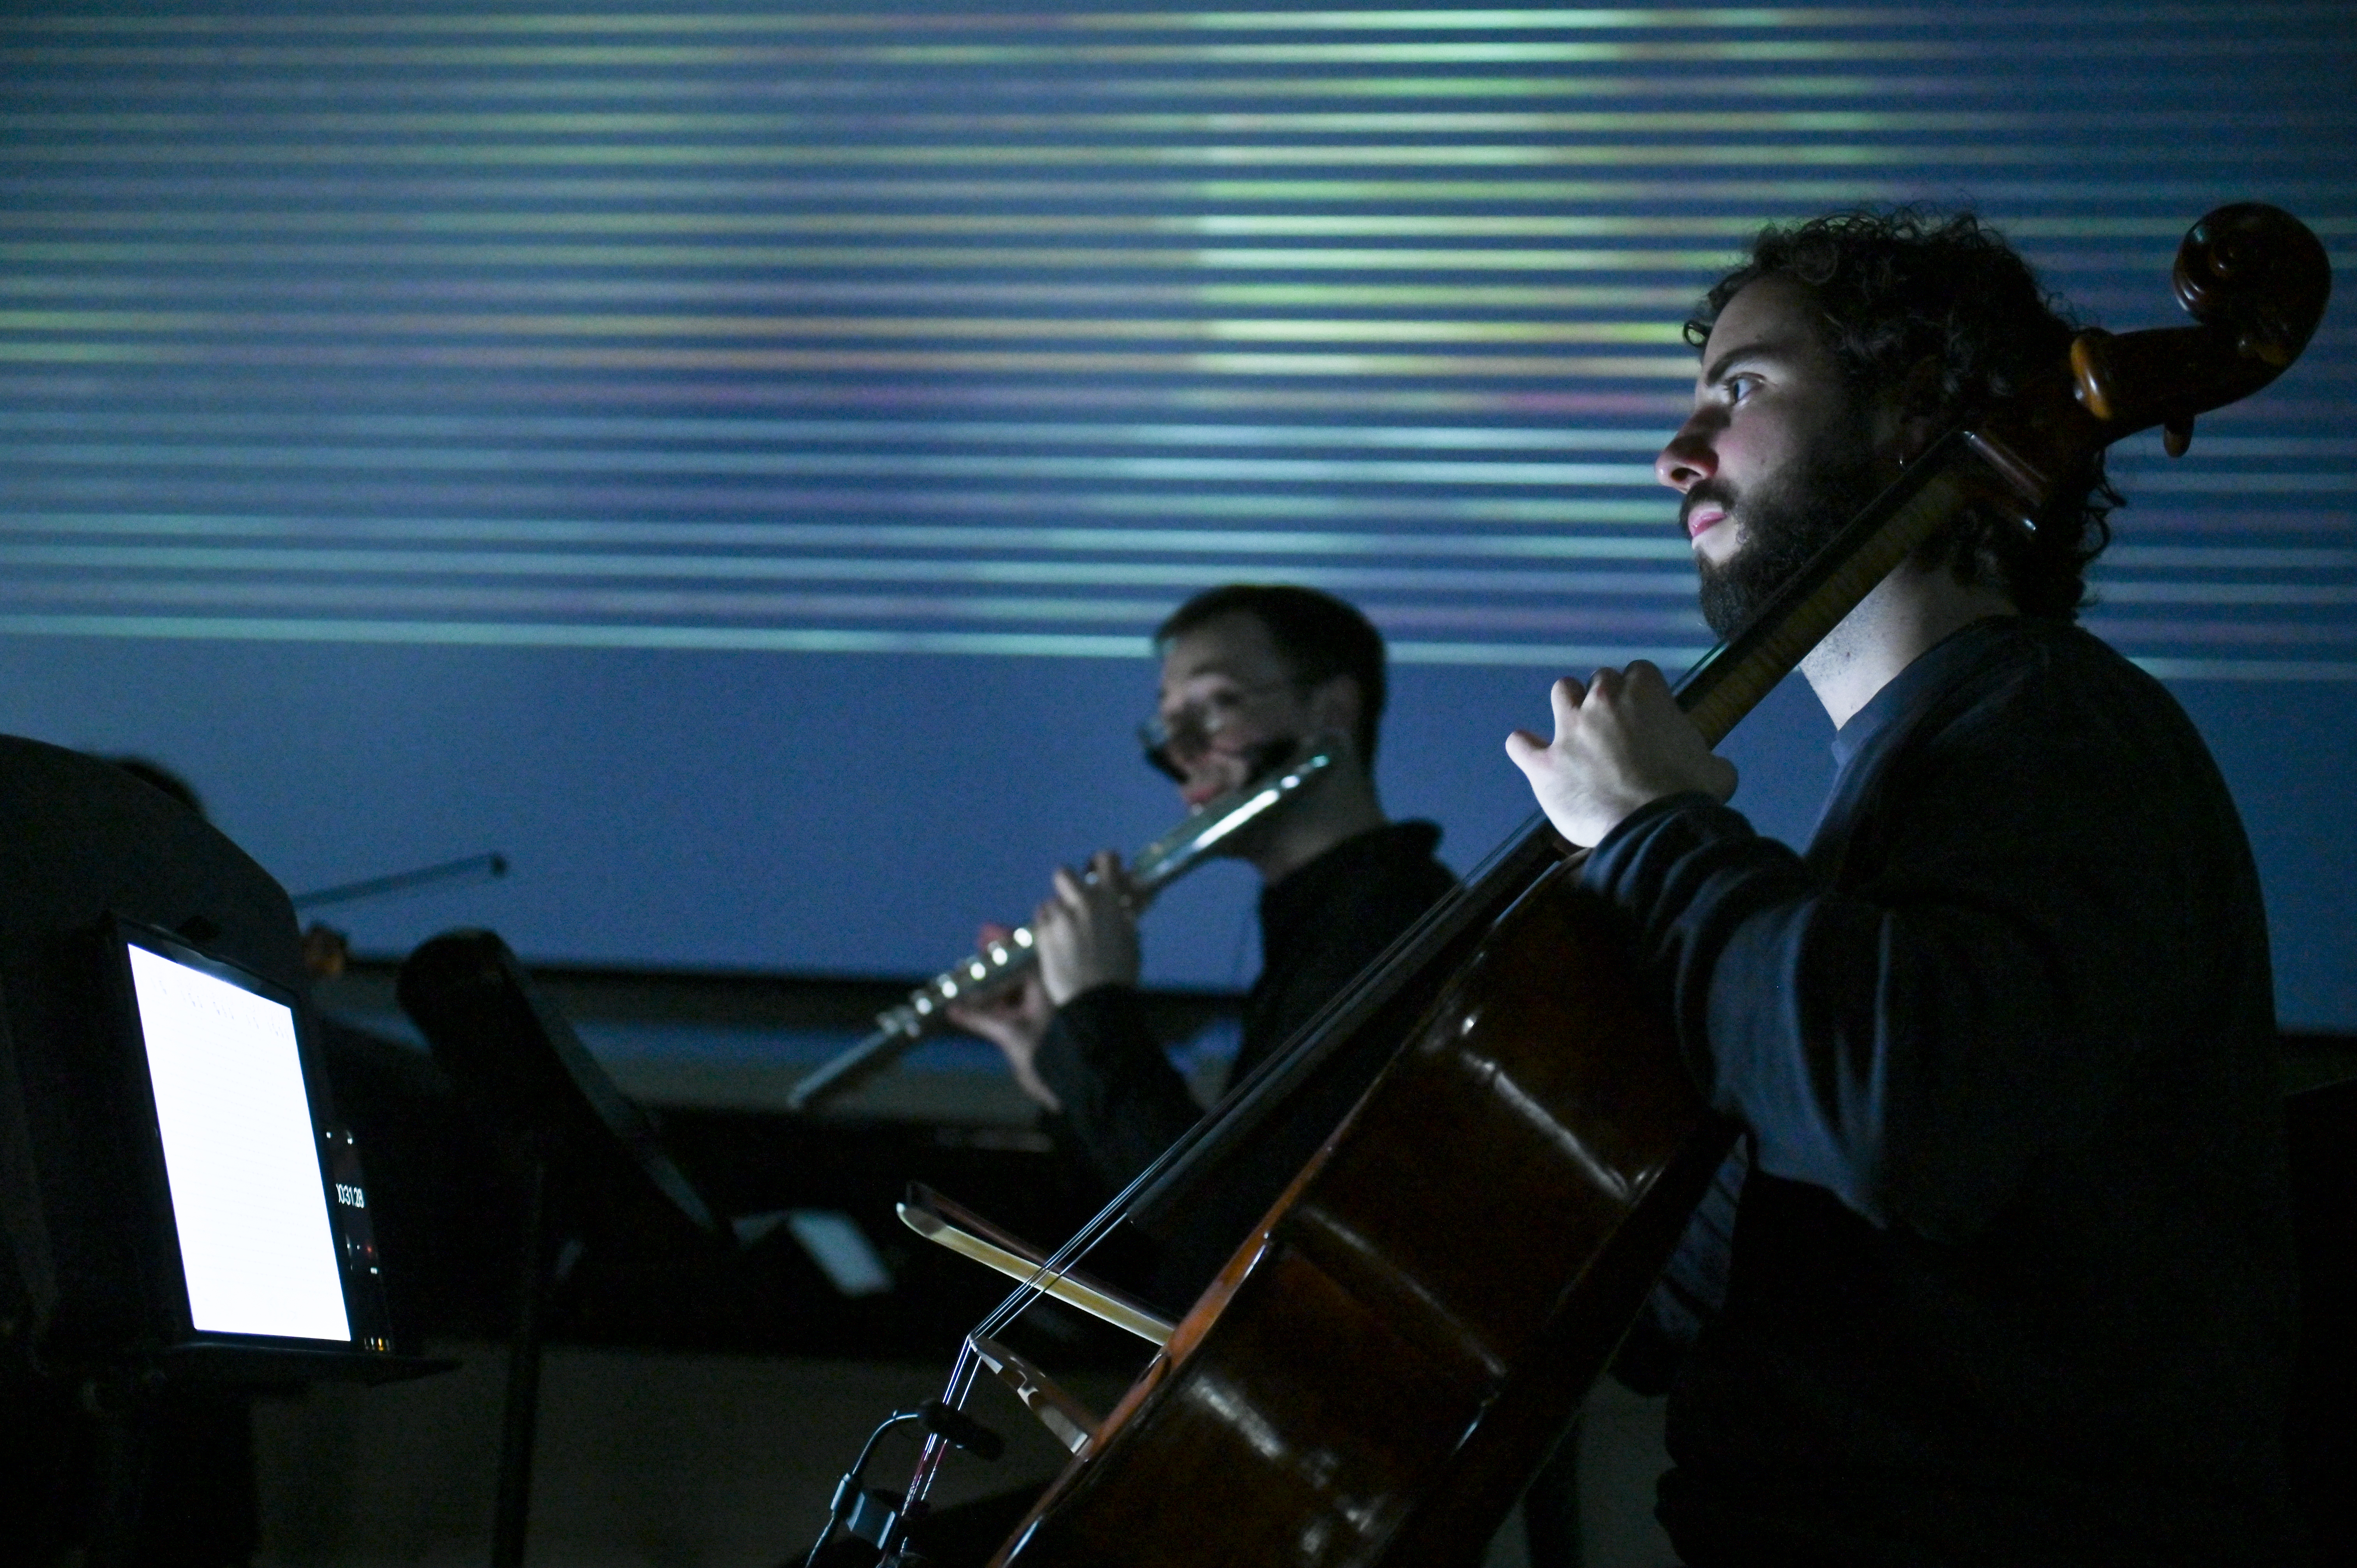 A cellist and a flautist performing against a dark blue background